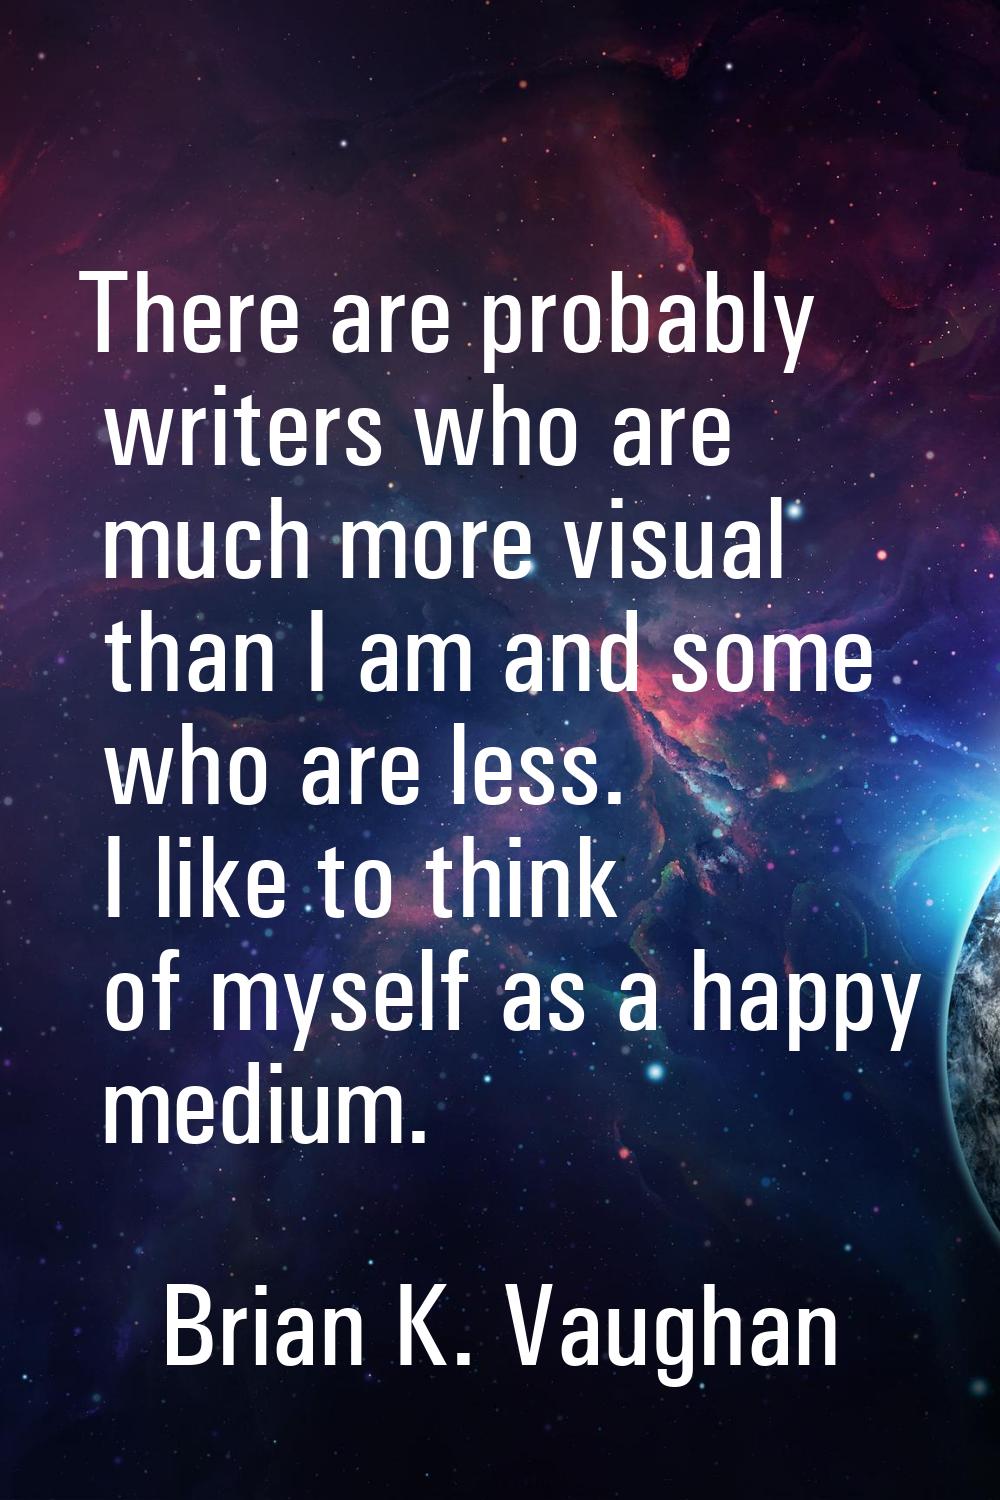 There are probably writers who are much more visual than I am and some who are less. I like to thin